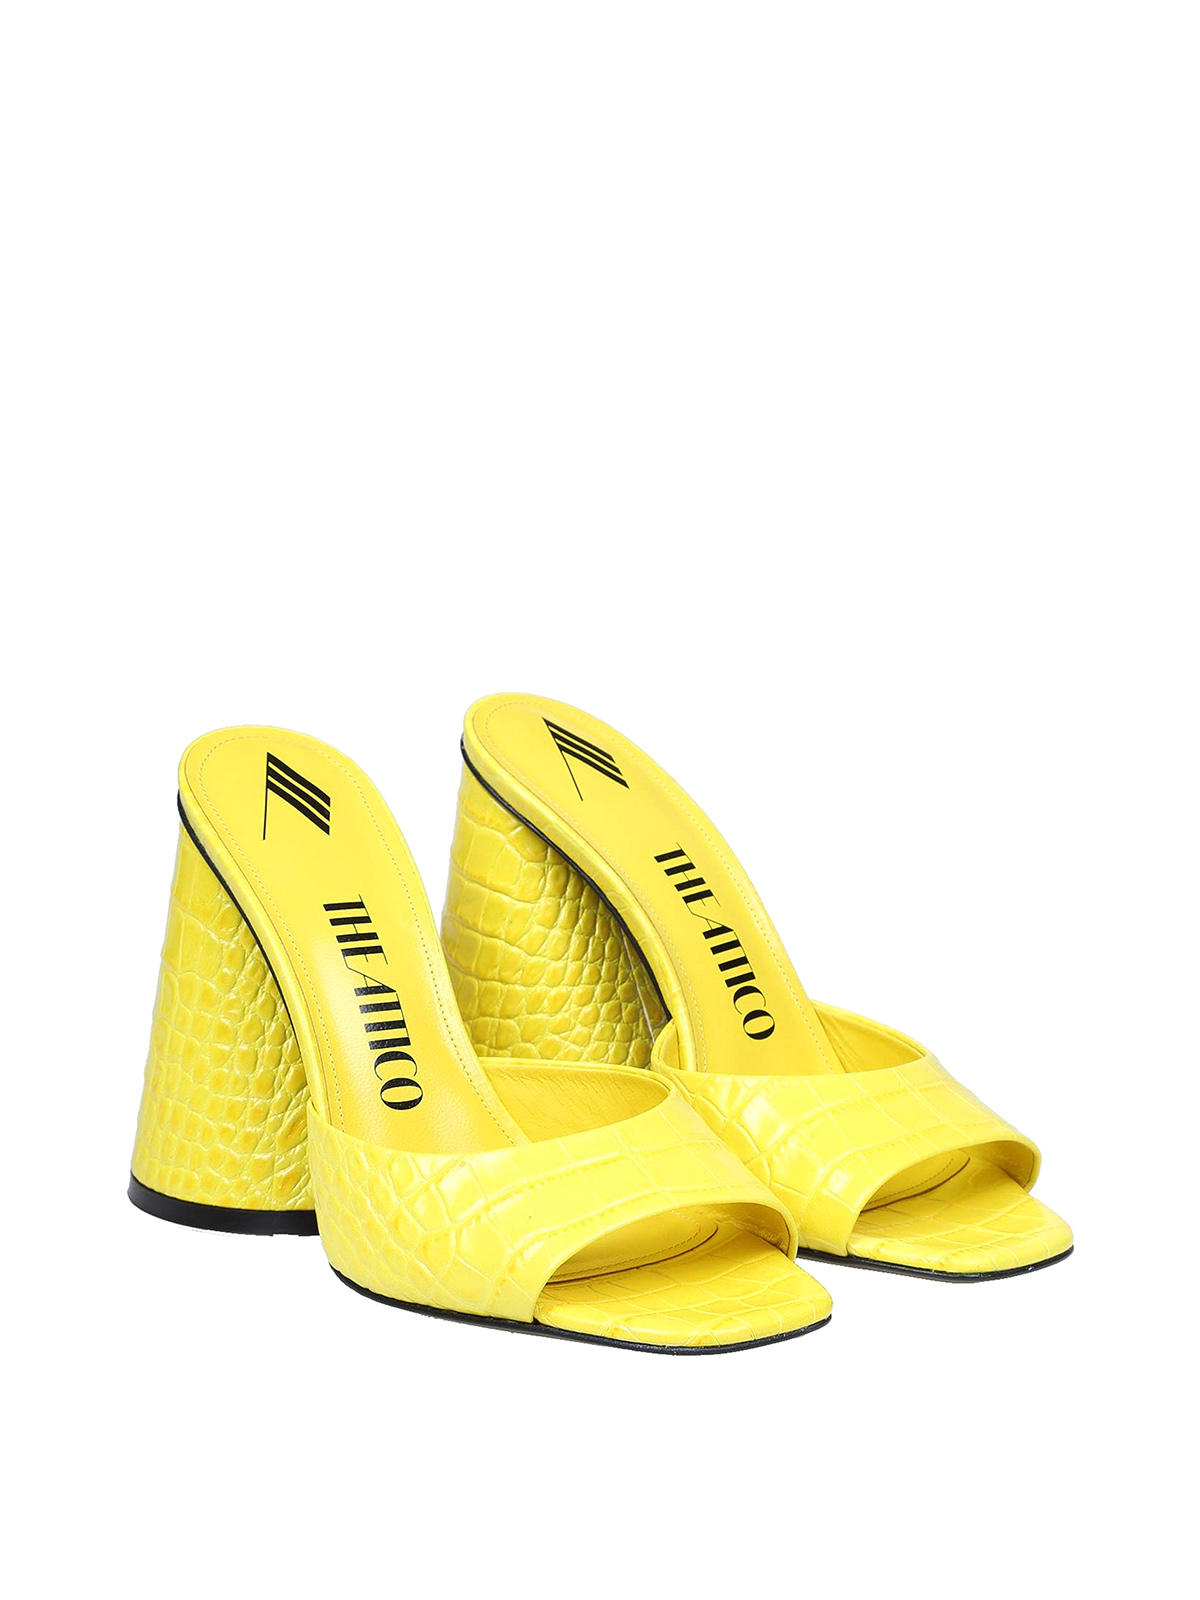 Mules shoes The Attico - Luz mules in yellow leather ...